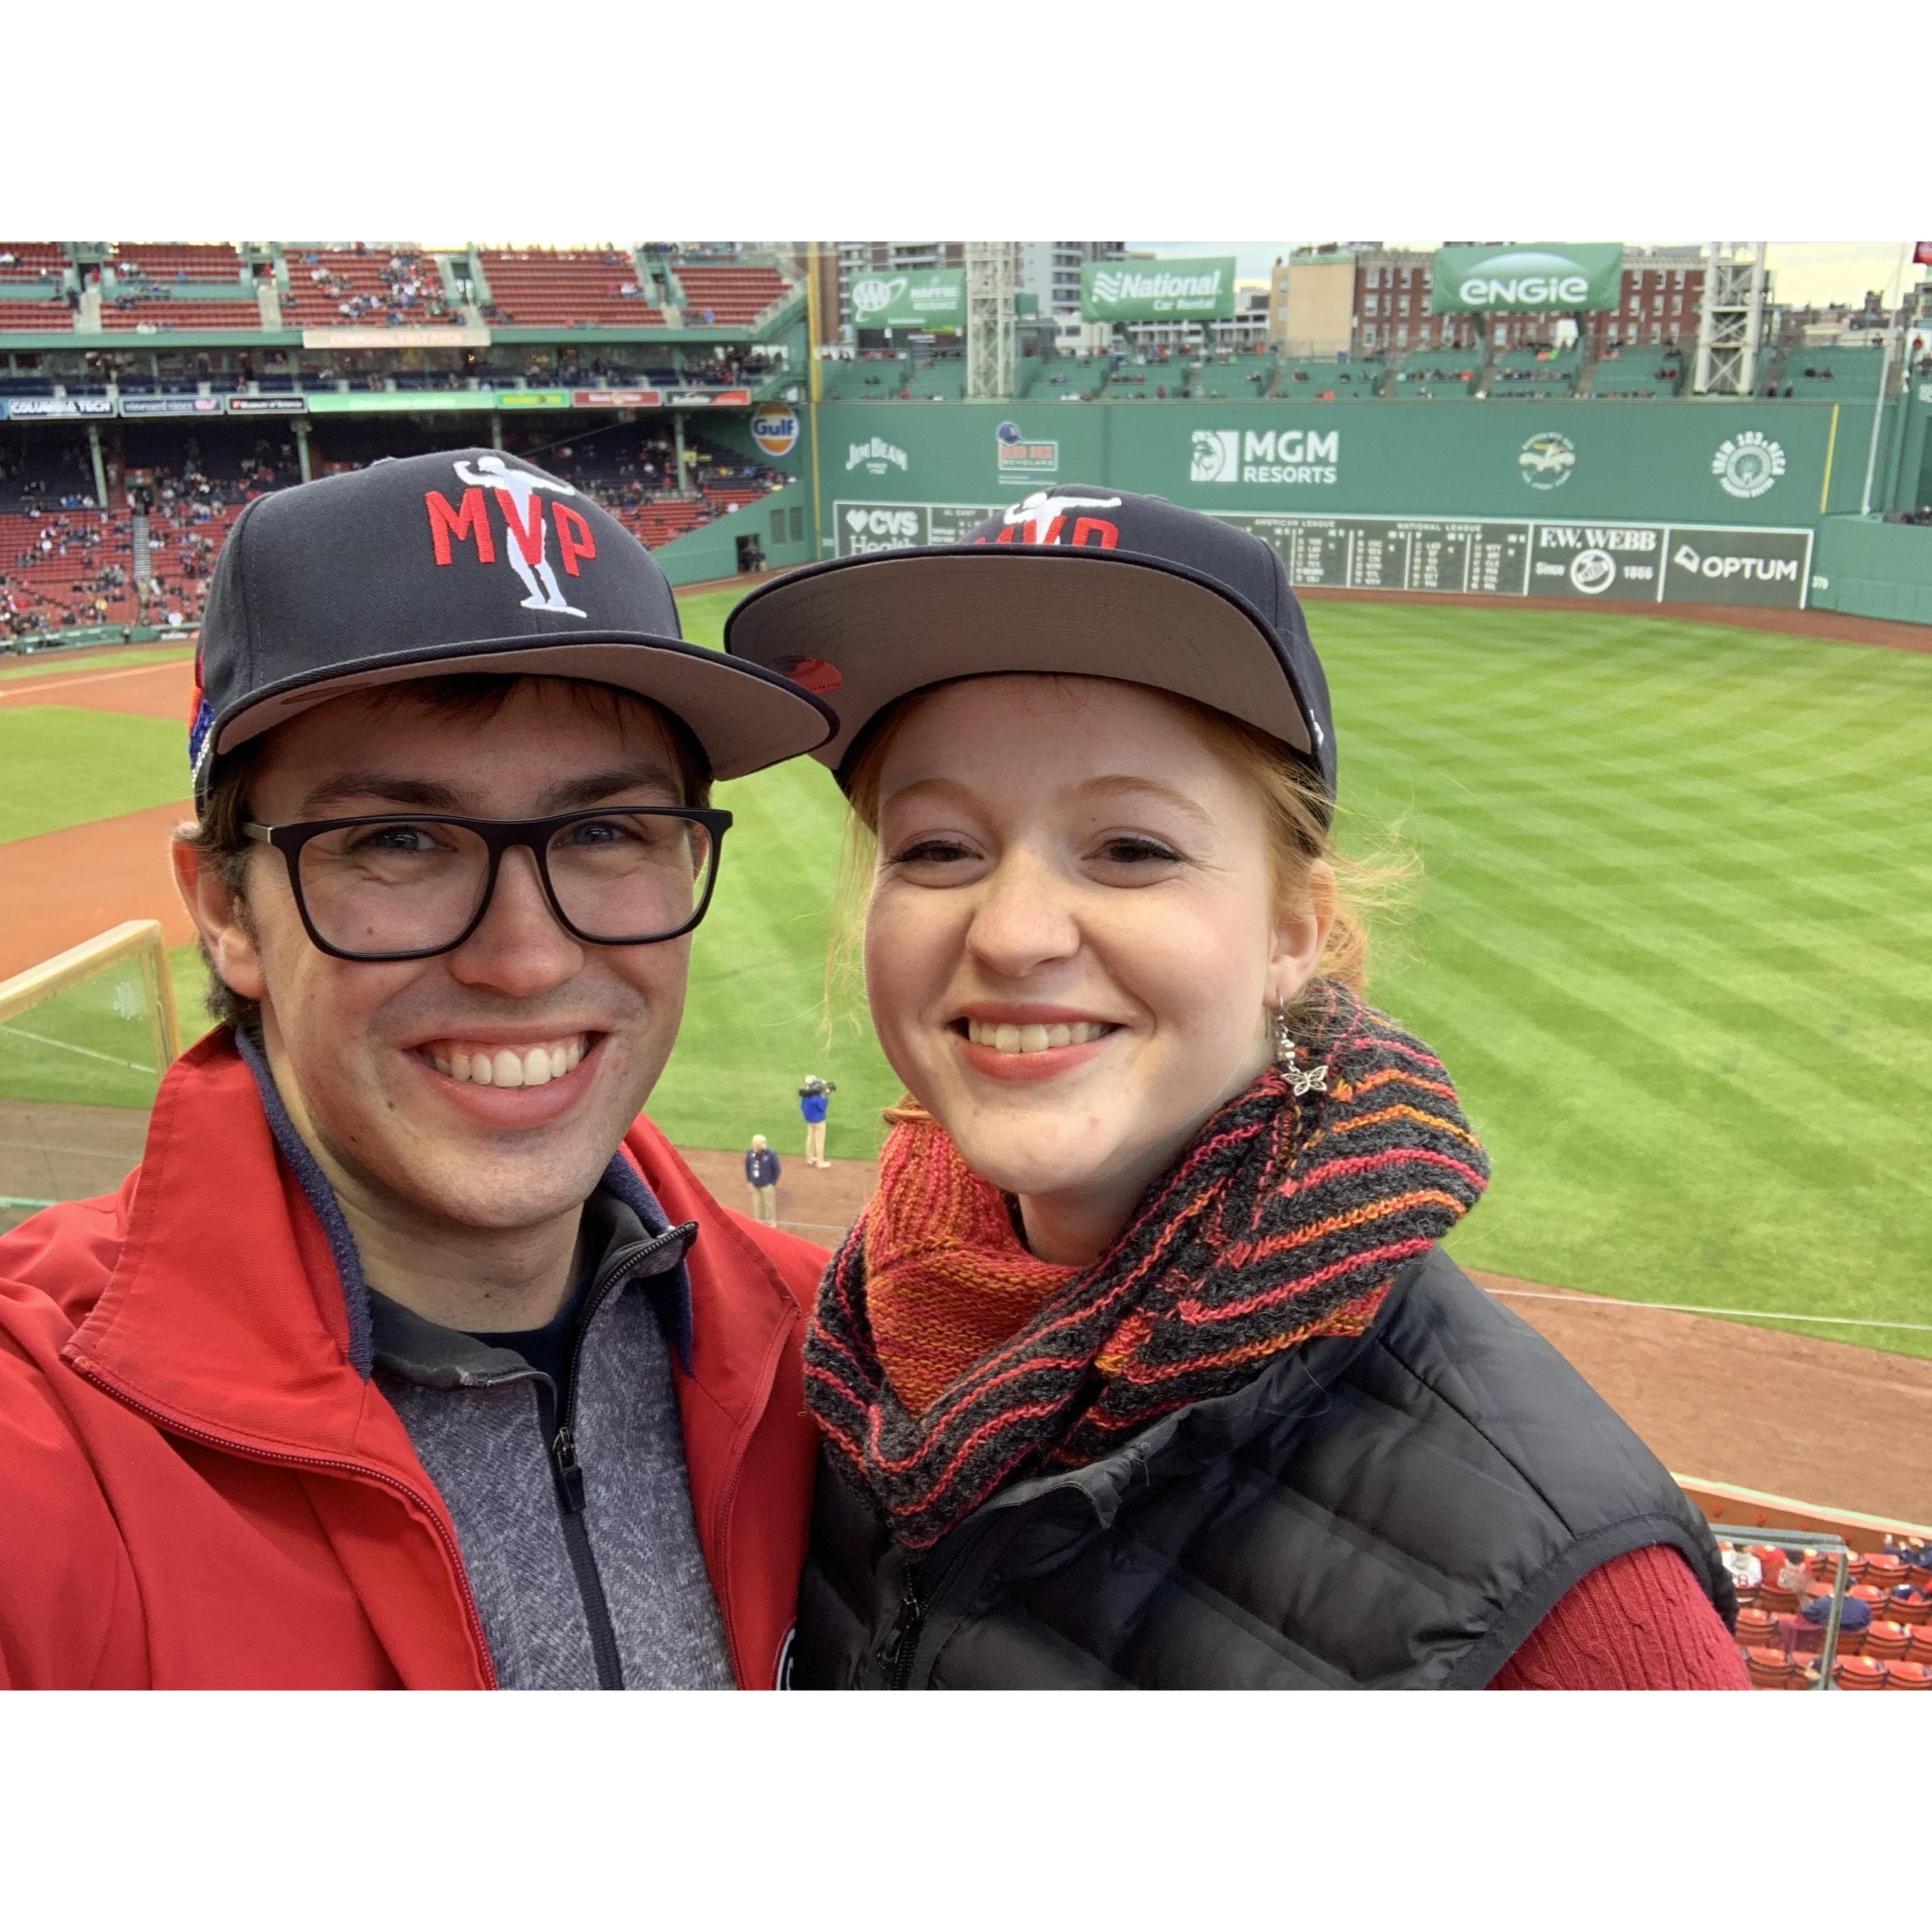 Our very first Red Sox Game together, a cold evening. April 30, 2019 (Red Sox 5, Athletics 1, a good omen)